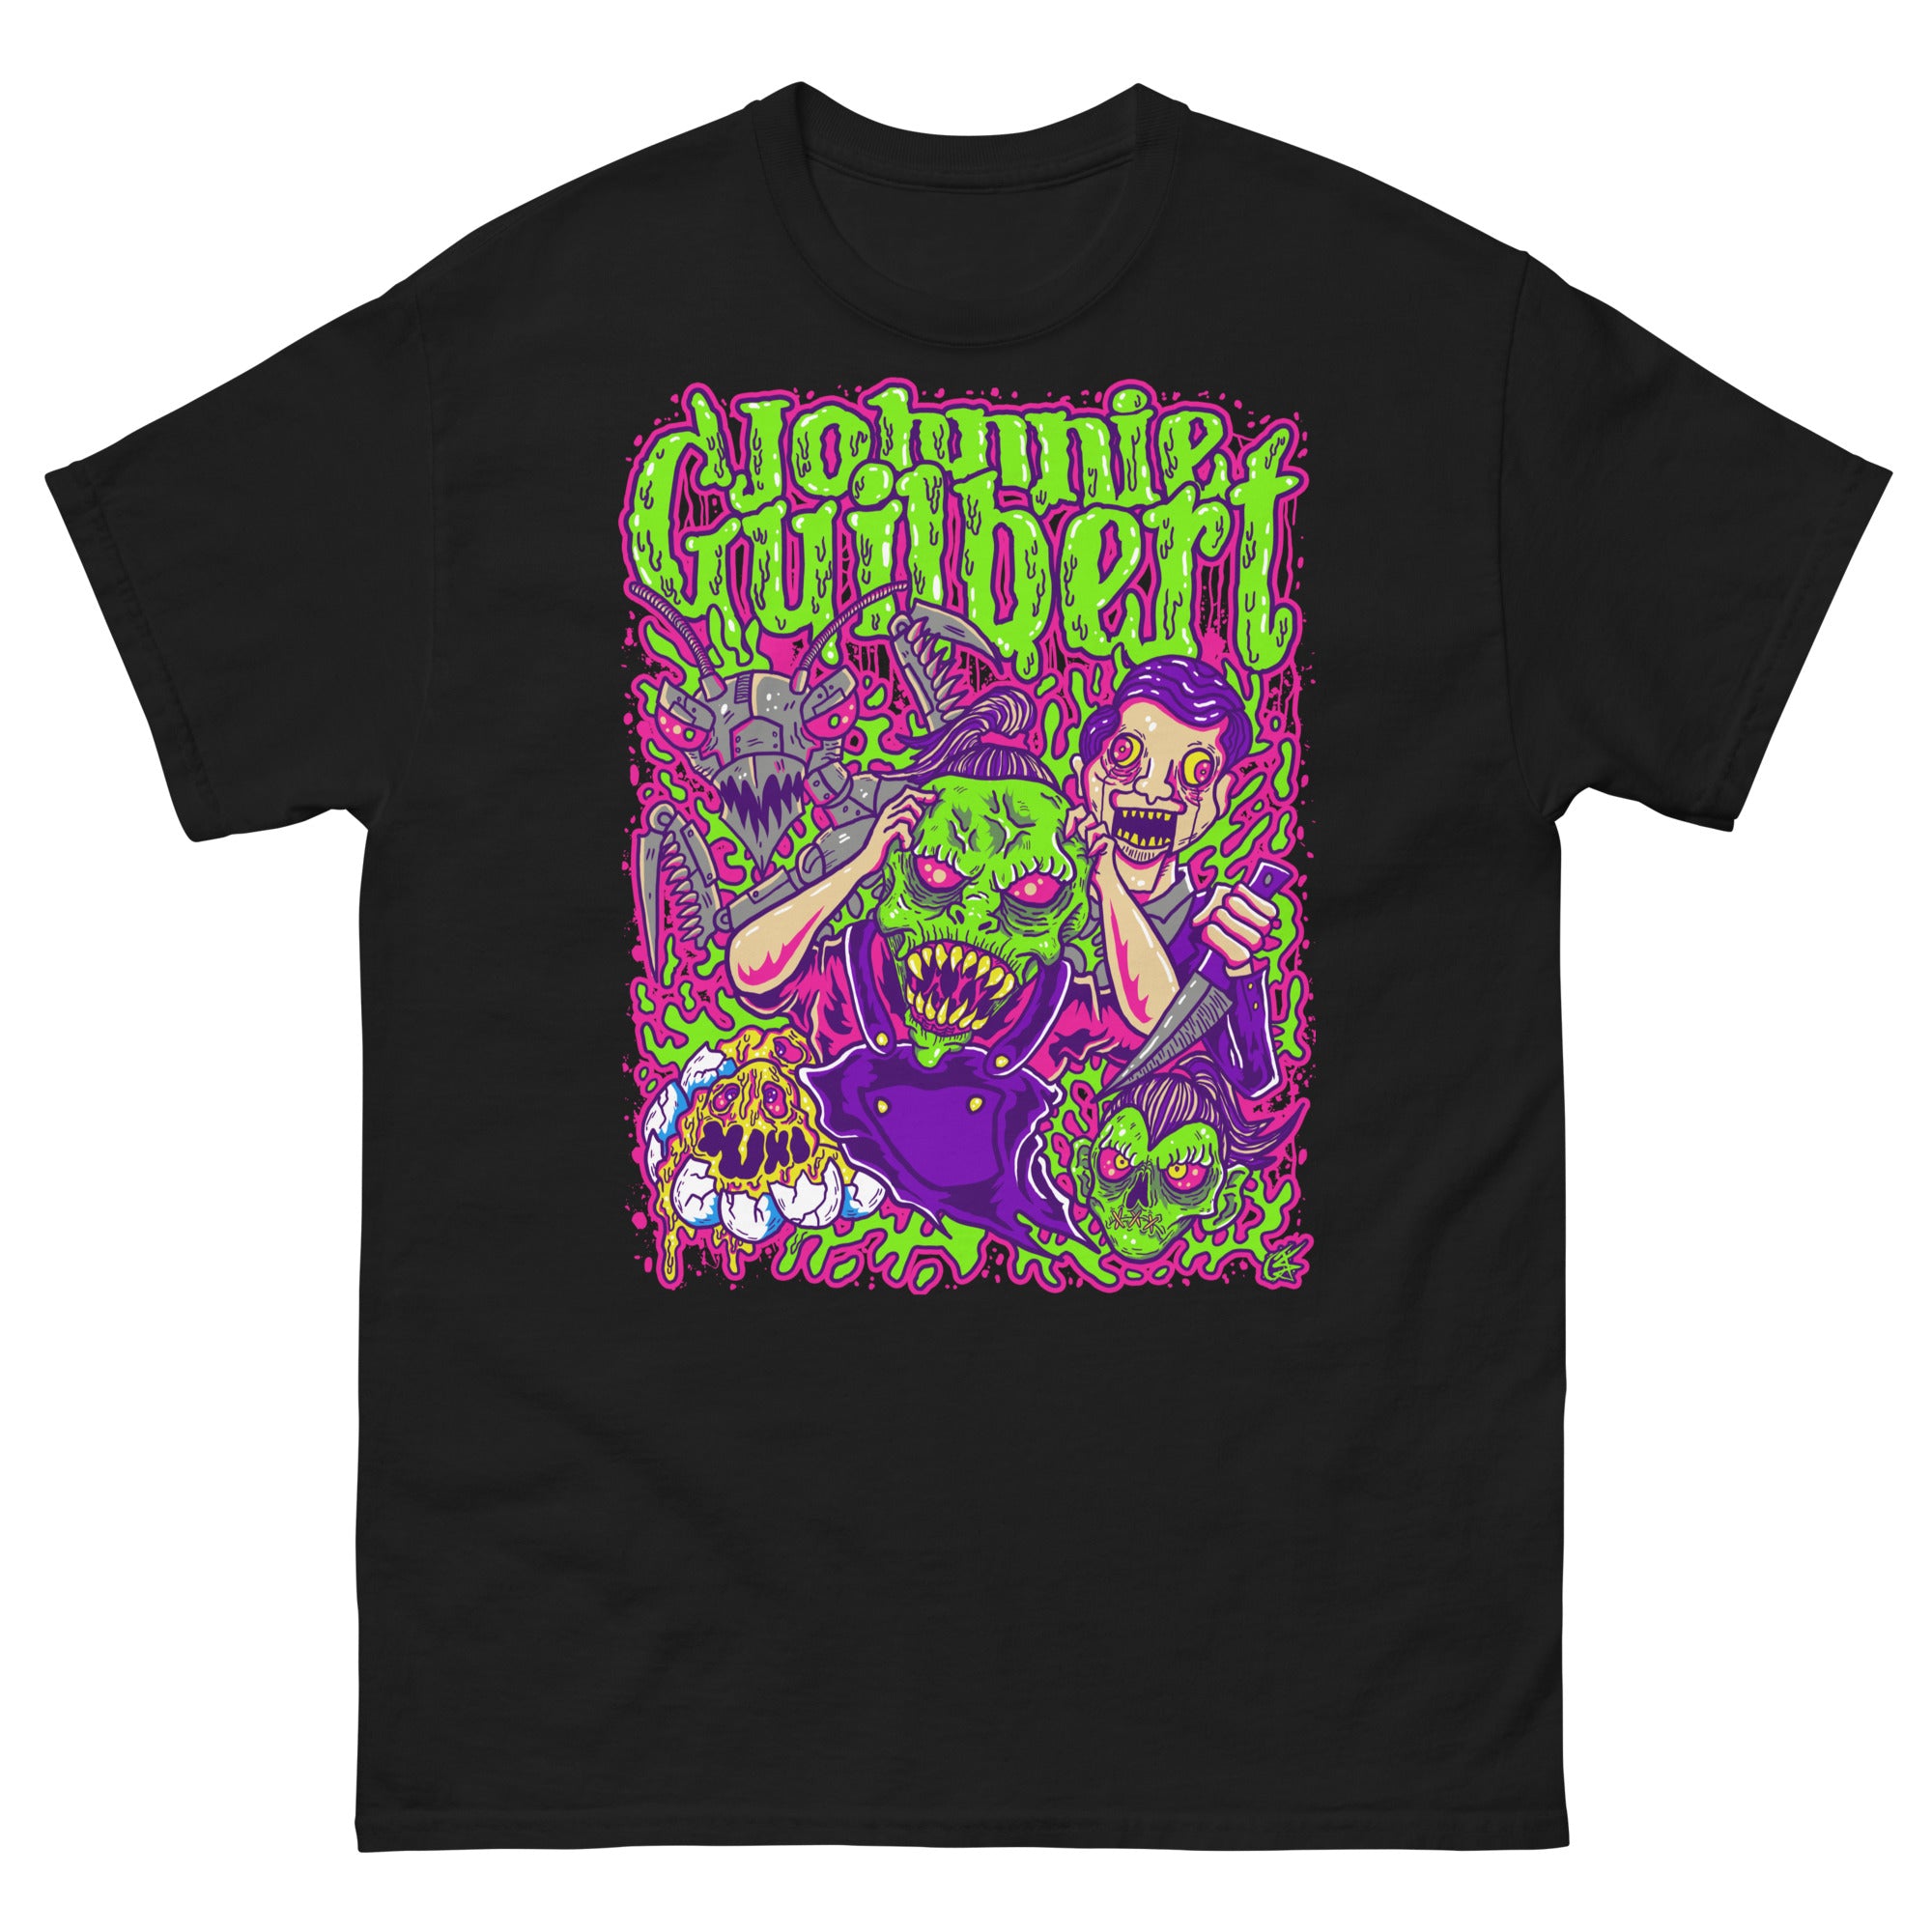 Haunted Ghouls classic tee